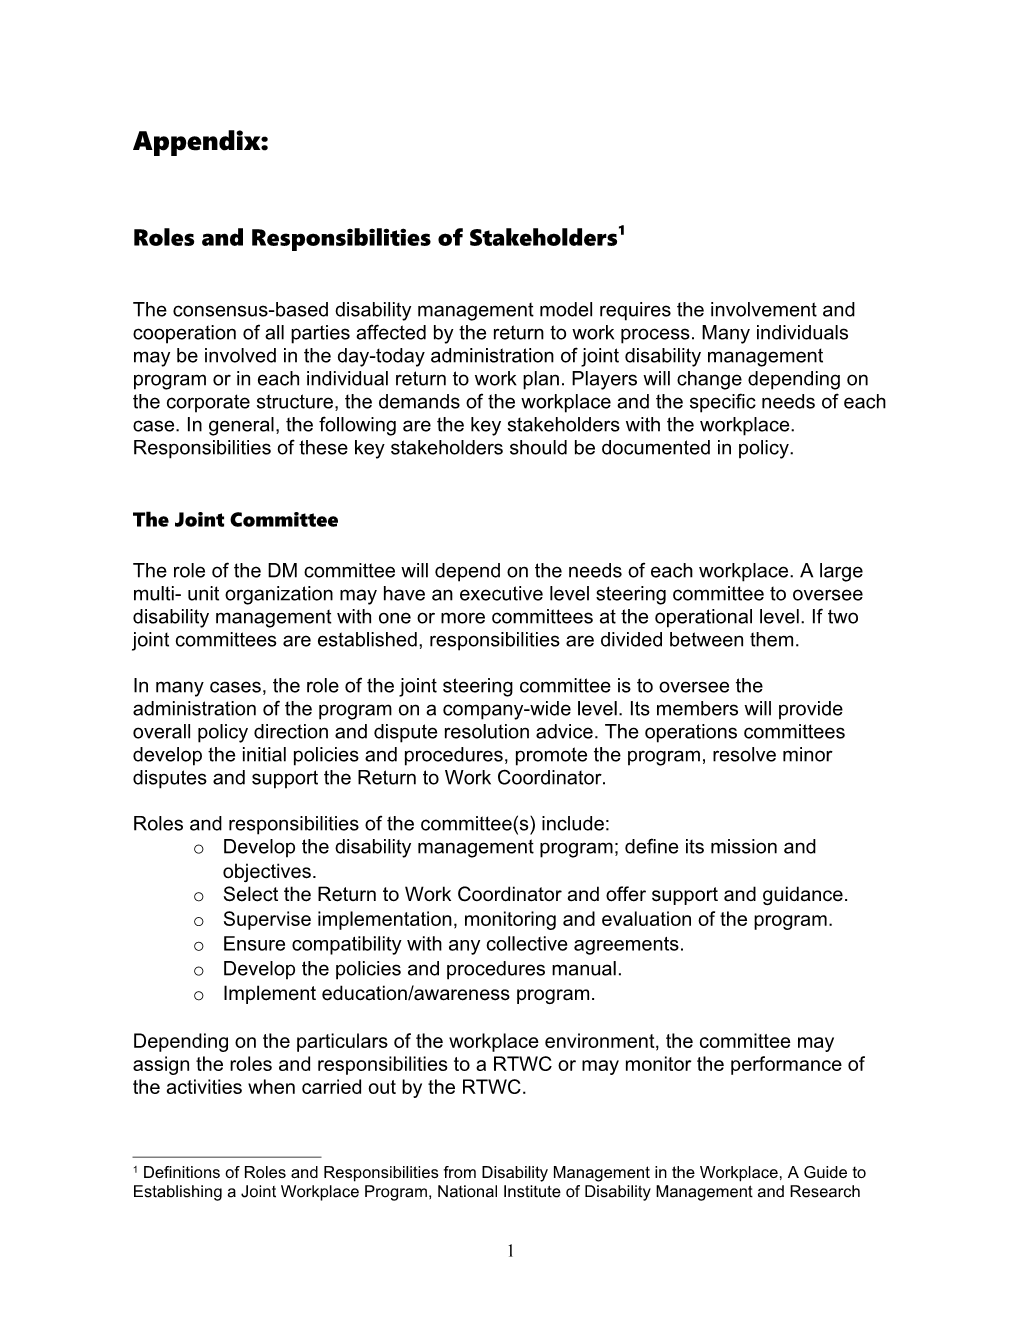 Roles and Responsibilities of Stakeholders 1